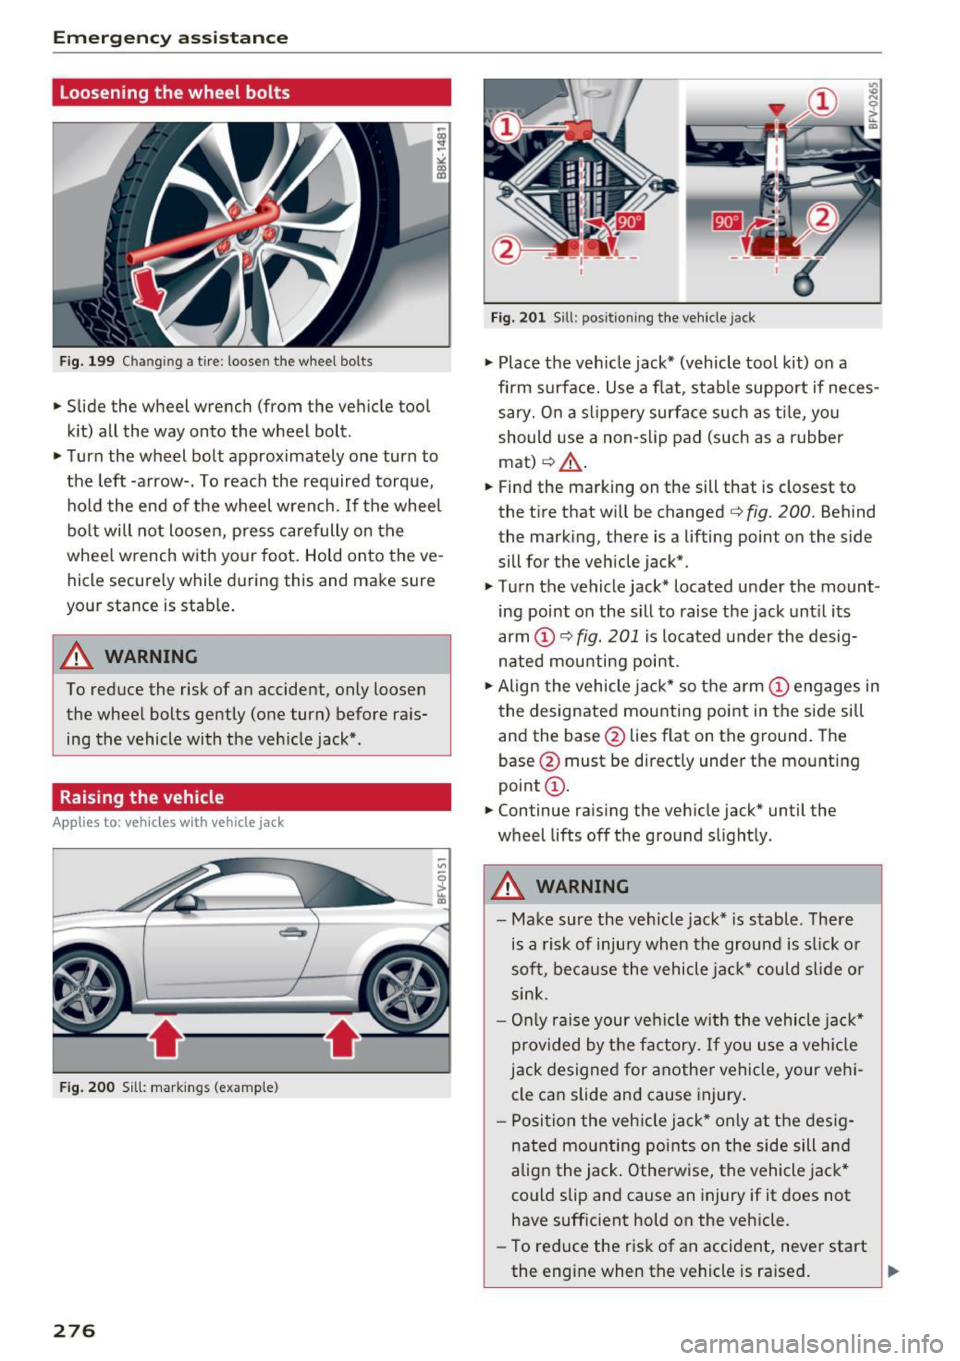 AUDI TT ROADSTER 2017  Owners Manual Emergency assistance 
Loosening the  wheel  bolts 
Fig. 199 Changing  a  tire:  loosen the  wheel  bolts 
• Slide  the  wheel  wrench  (from  the  vehicle  tool 
kit)  all the  way  onto  the  wheel